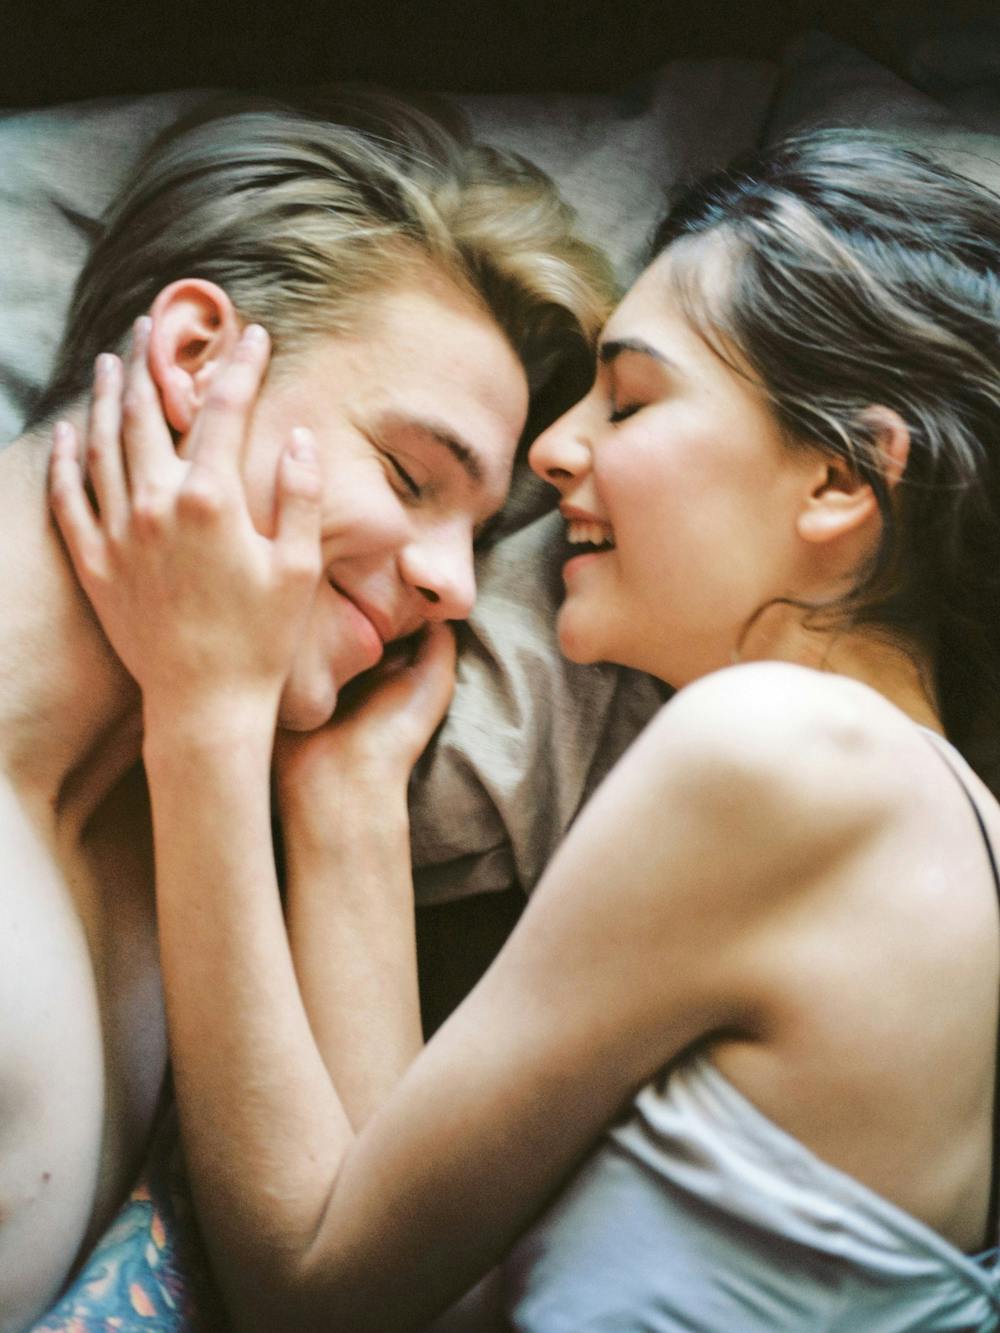 Man and woman lying on bed | Photo: Pexels